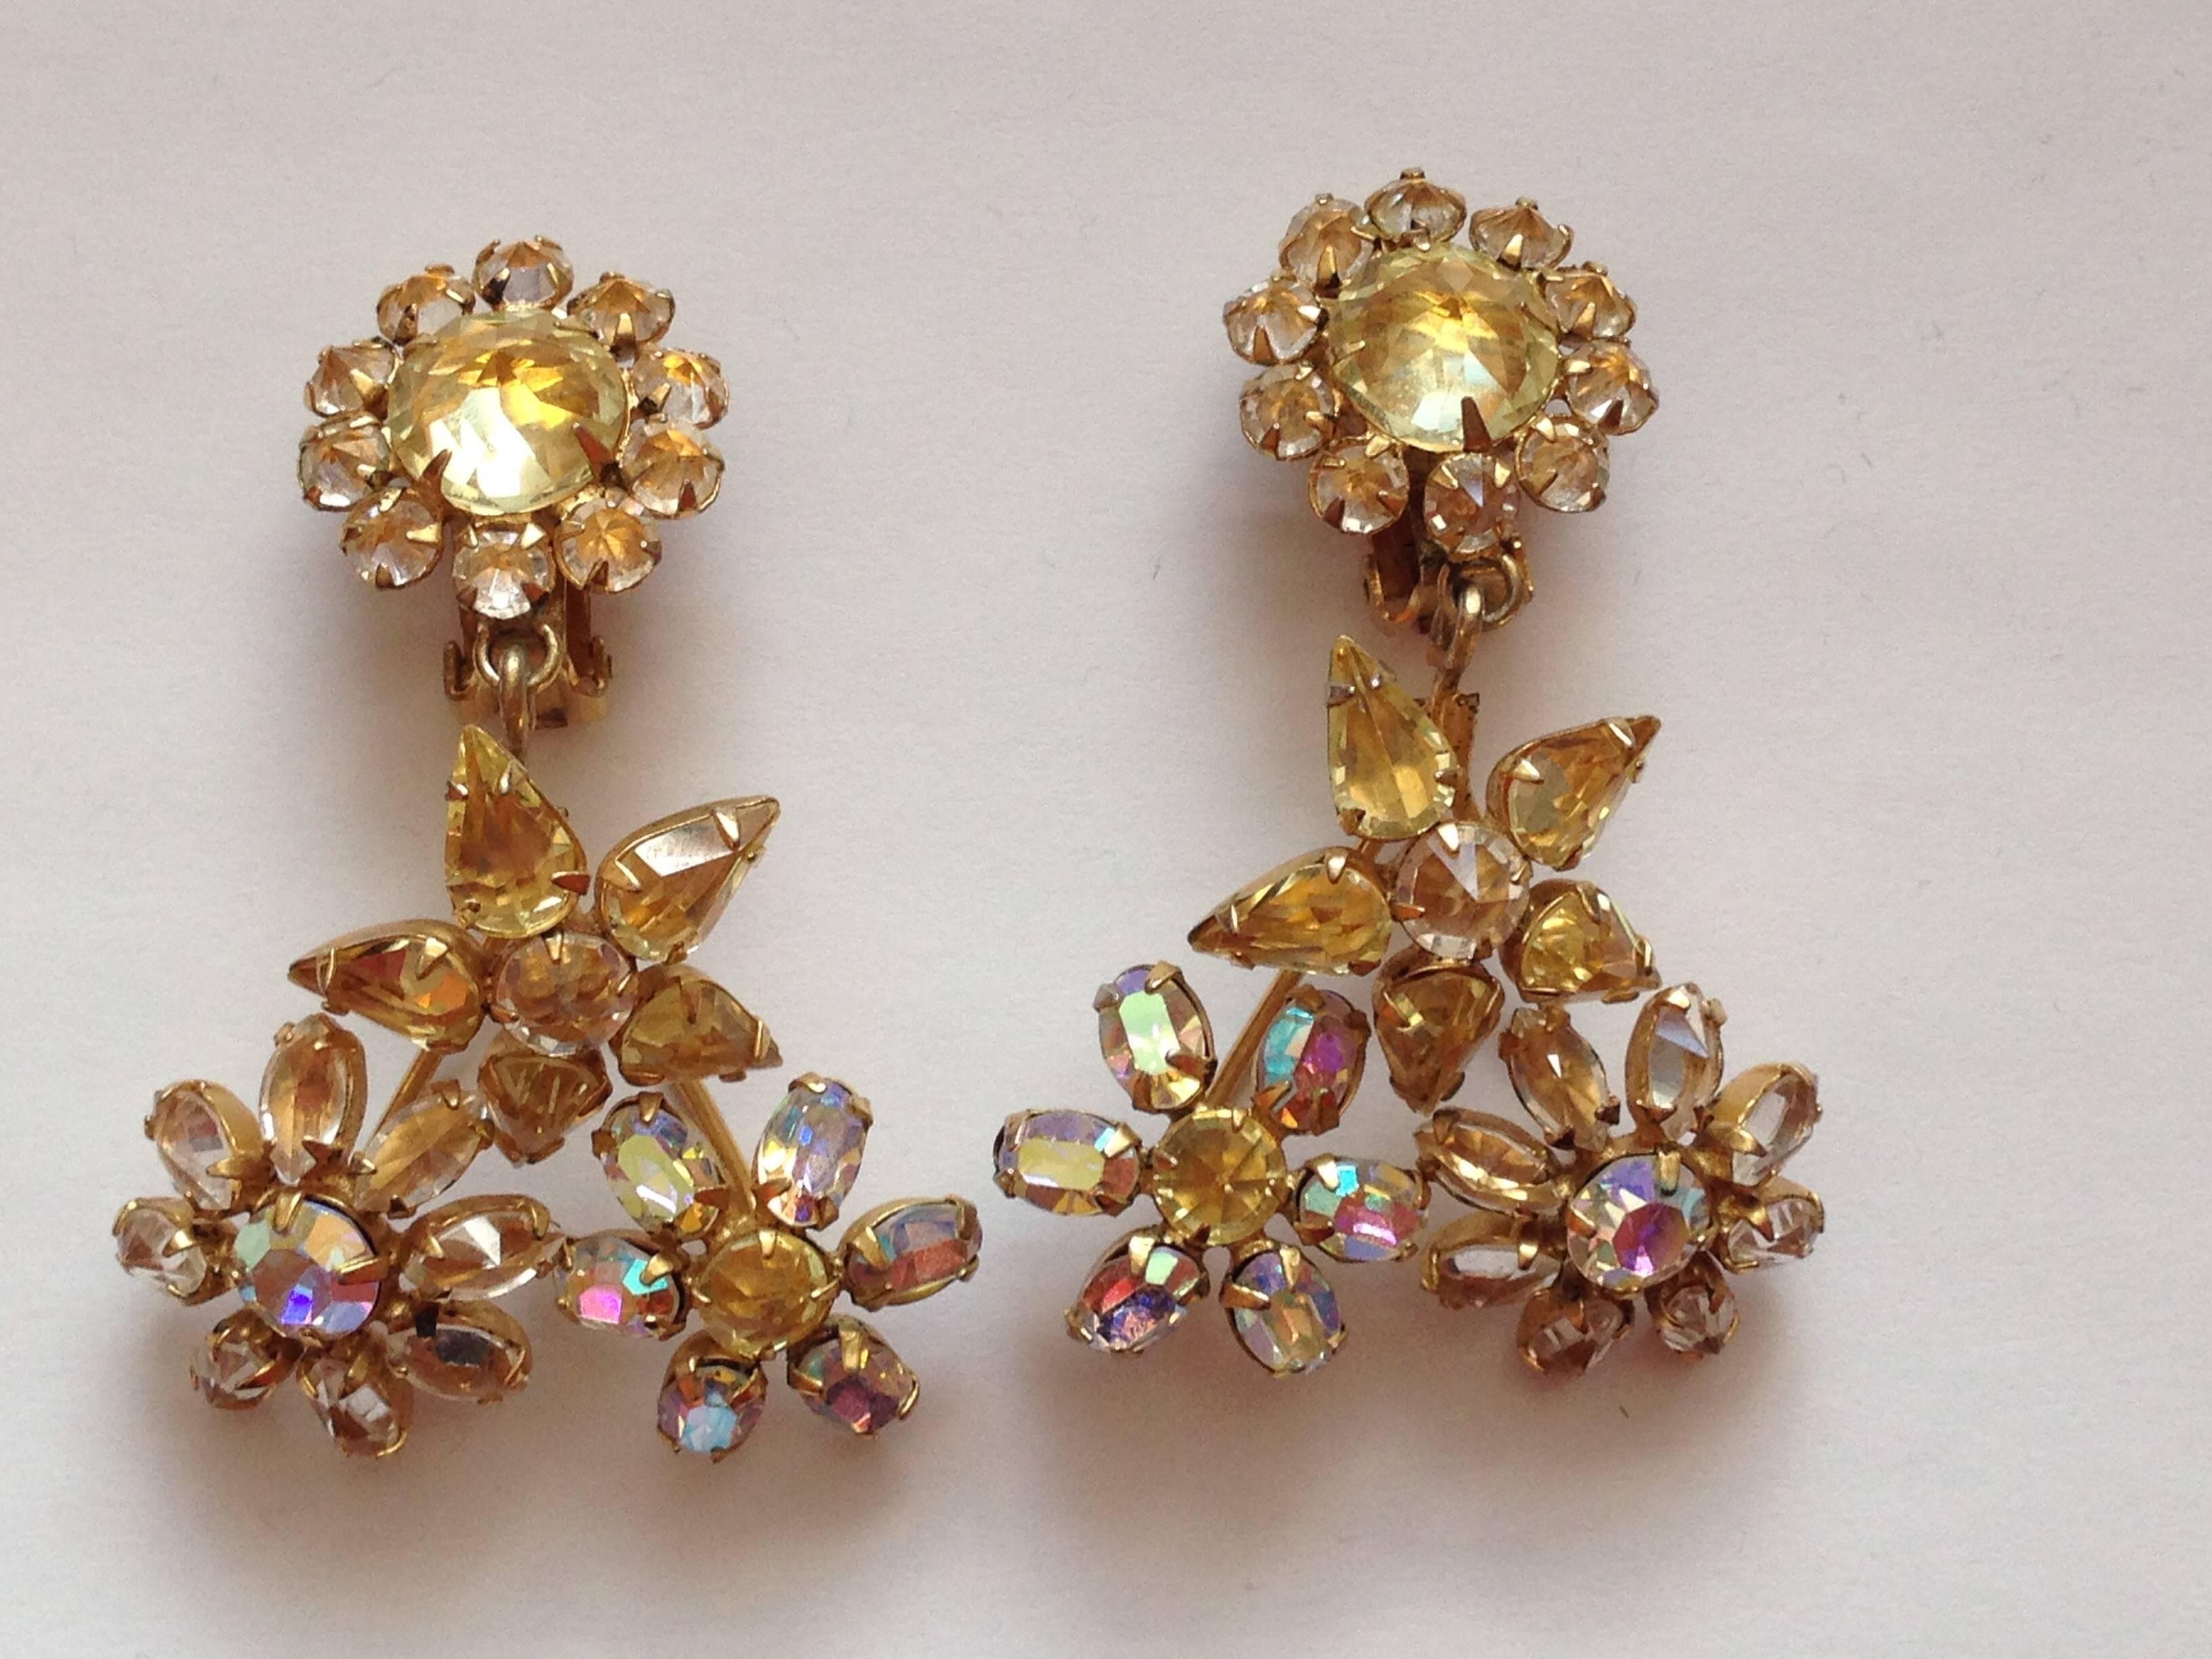 This is a beautiful pair of 1950s Schreiner clip-on earrings. They are gold toned metal set with yellow and clear aurora borealis glass crystals set with the pointed side up - a Schreiner trademark.  They measure 2 1/2" long x 5/8" wide